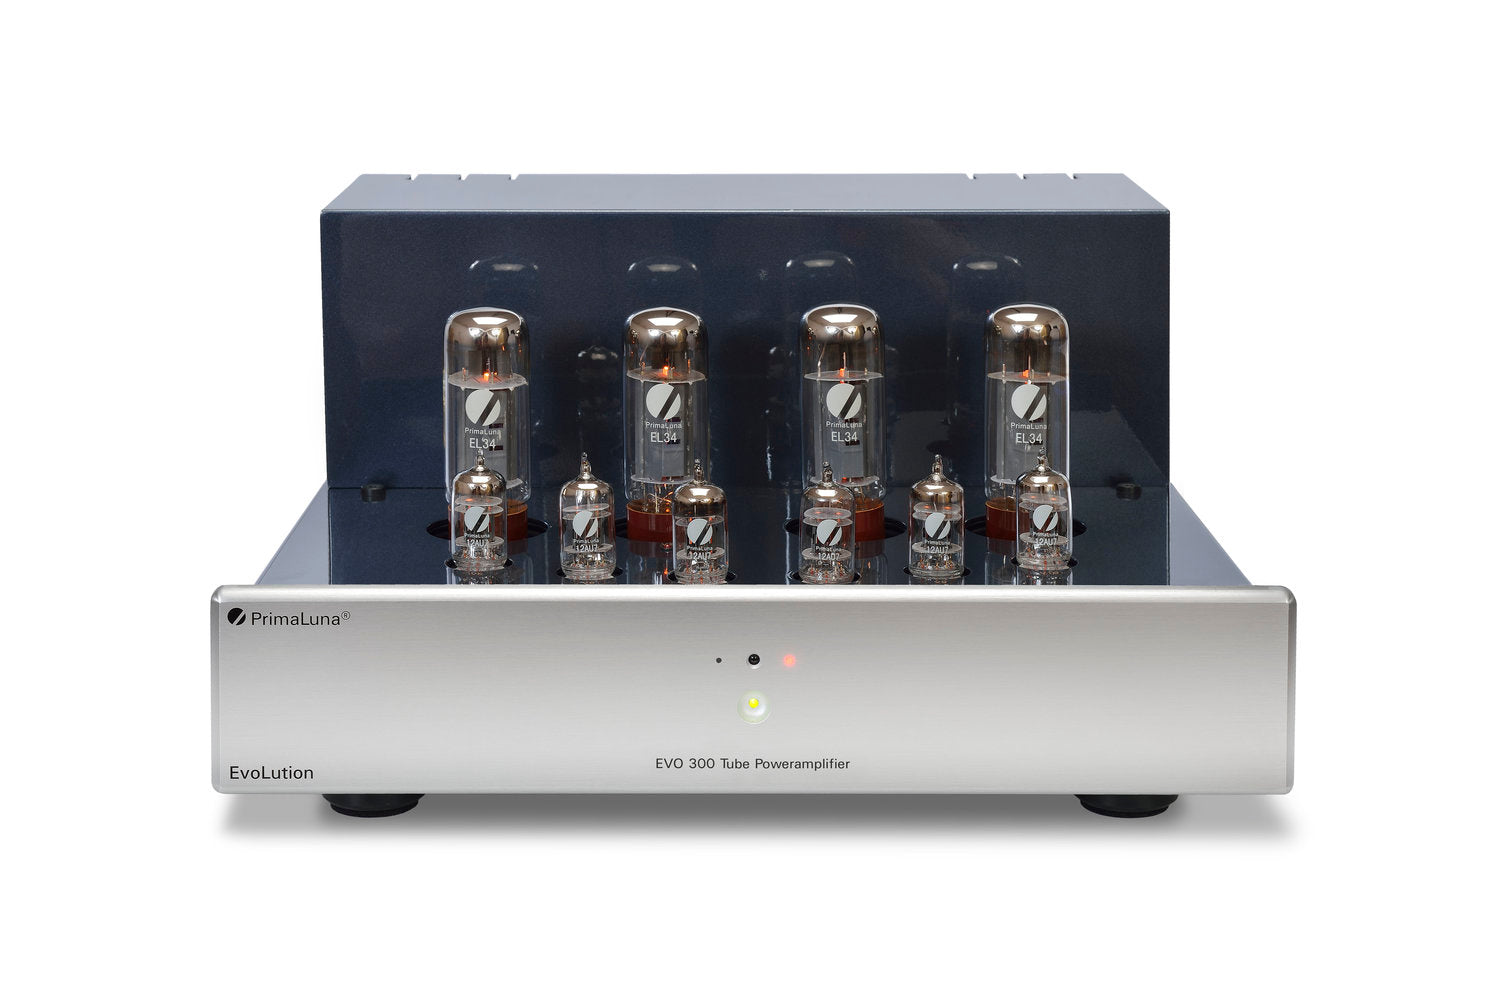 PRIMALUNA EVO 300 TUBE POWER AMPLIFIER - Discover the high quality music at a very best price at Vinyl Sound. Check out the Integrated Amplifiers: PrimaLuna EVO 300, Primaluna evo 100, Primaluna evo 200, The Power Amplifiers: Primaluna evo 400, PrimaLuna Evo 30, Primaluna evo 100, The Preamplifiers: Primaluna evo 100, Primaluna evo 300, Tube-Hybrid Integrated, the PrimaLuna transformers...